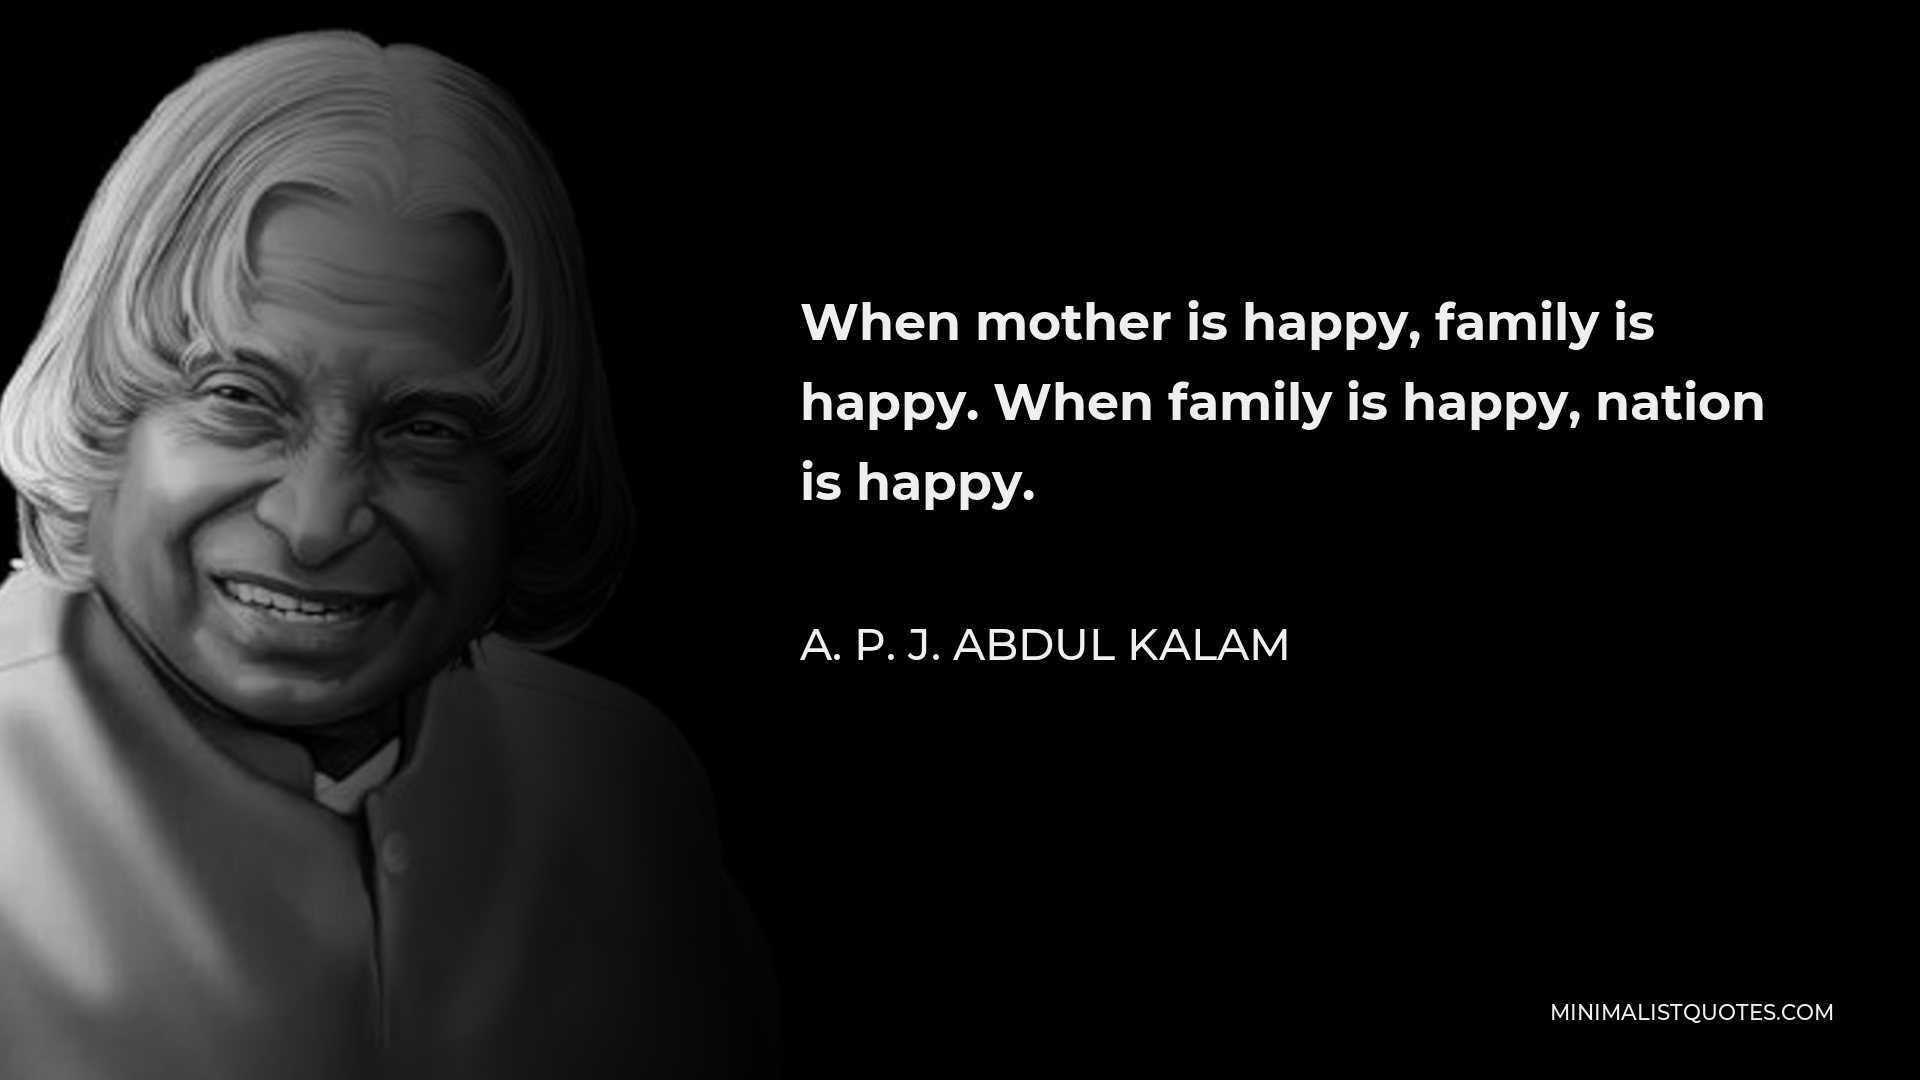 A. P. J. Abdul Kalam Quote - When mother is happy, family is happy. When family is happy, nation is happy.